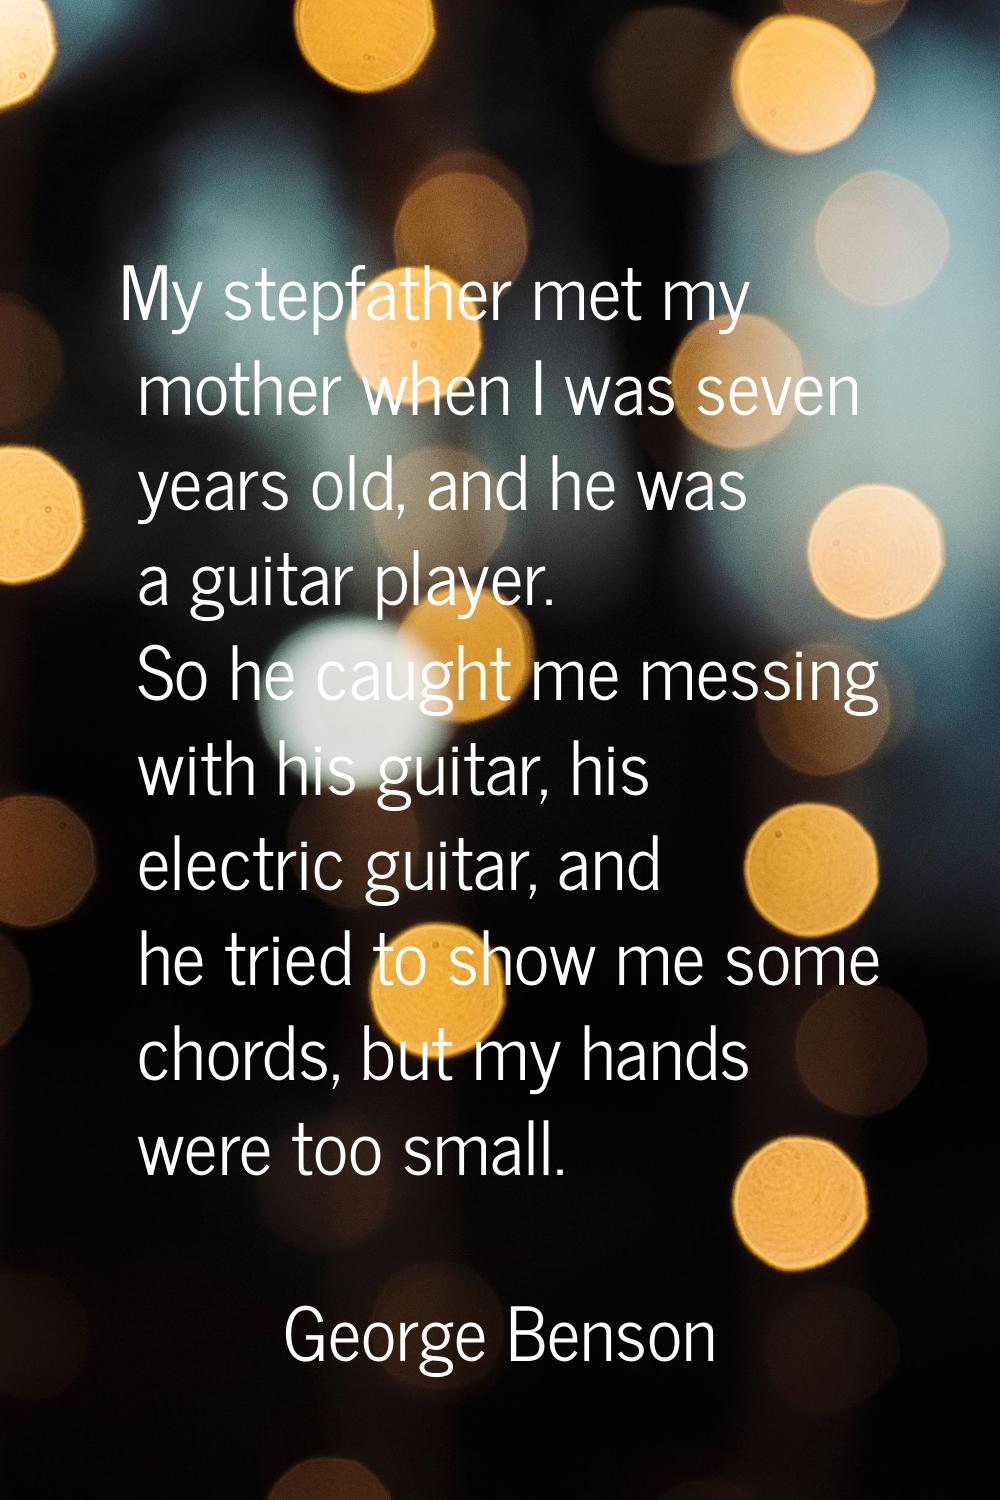 My stepfather met my mother when I was seven years old, and he was a guitar player. So he caught me